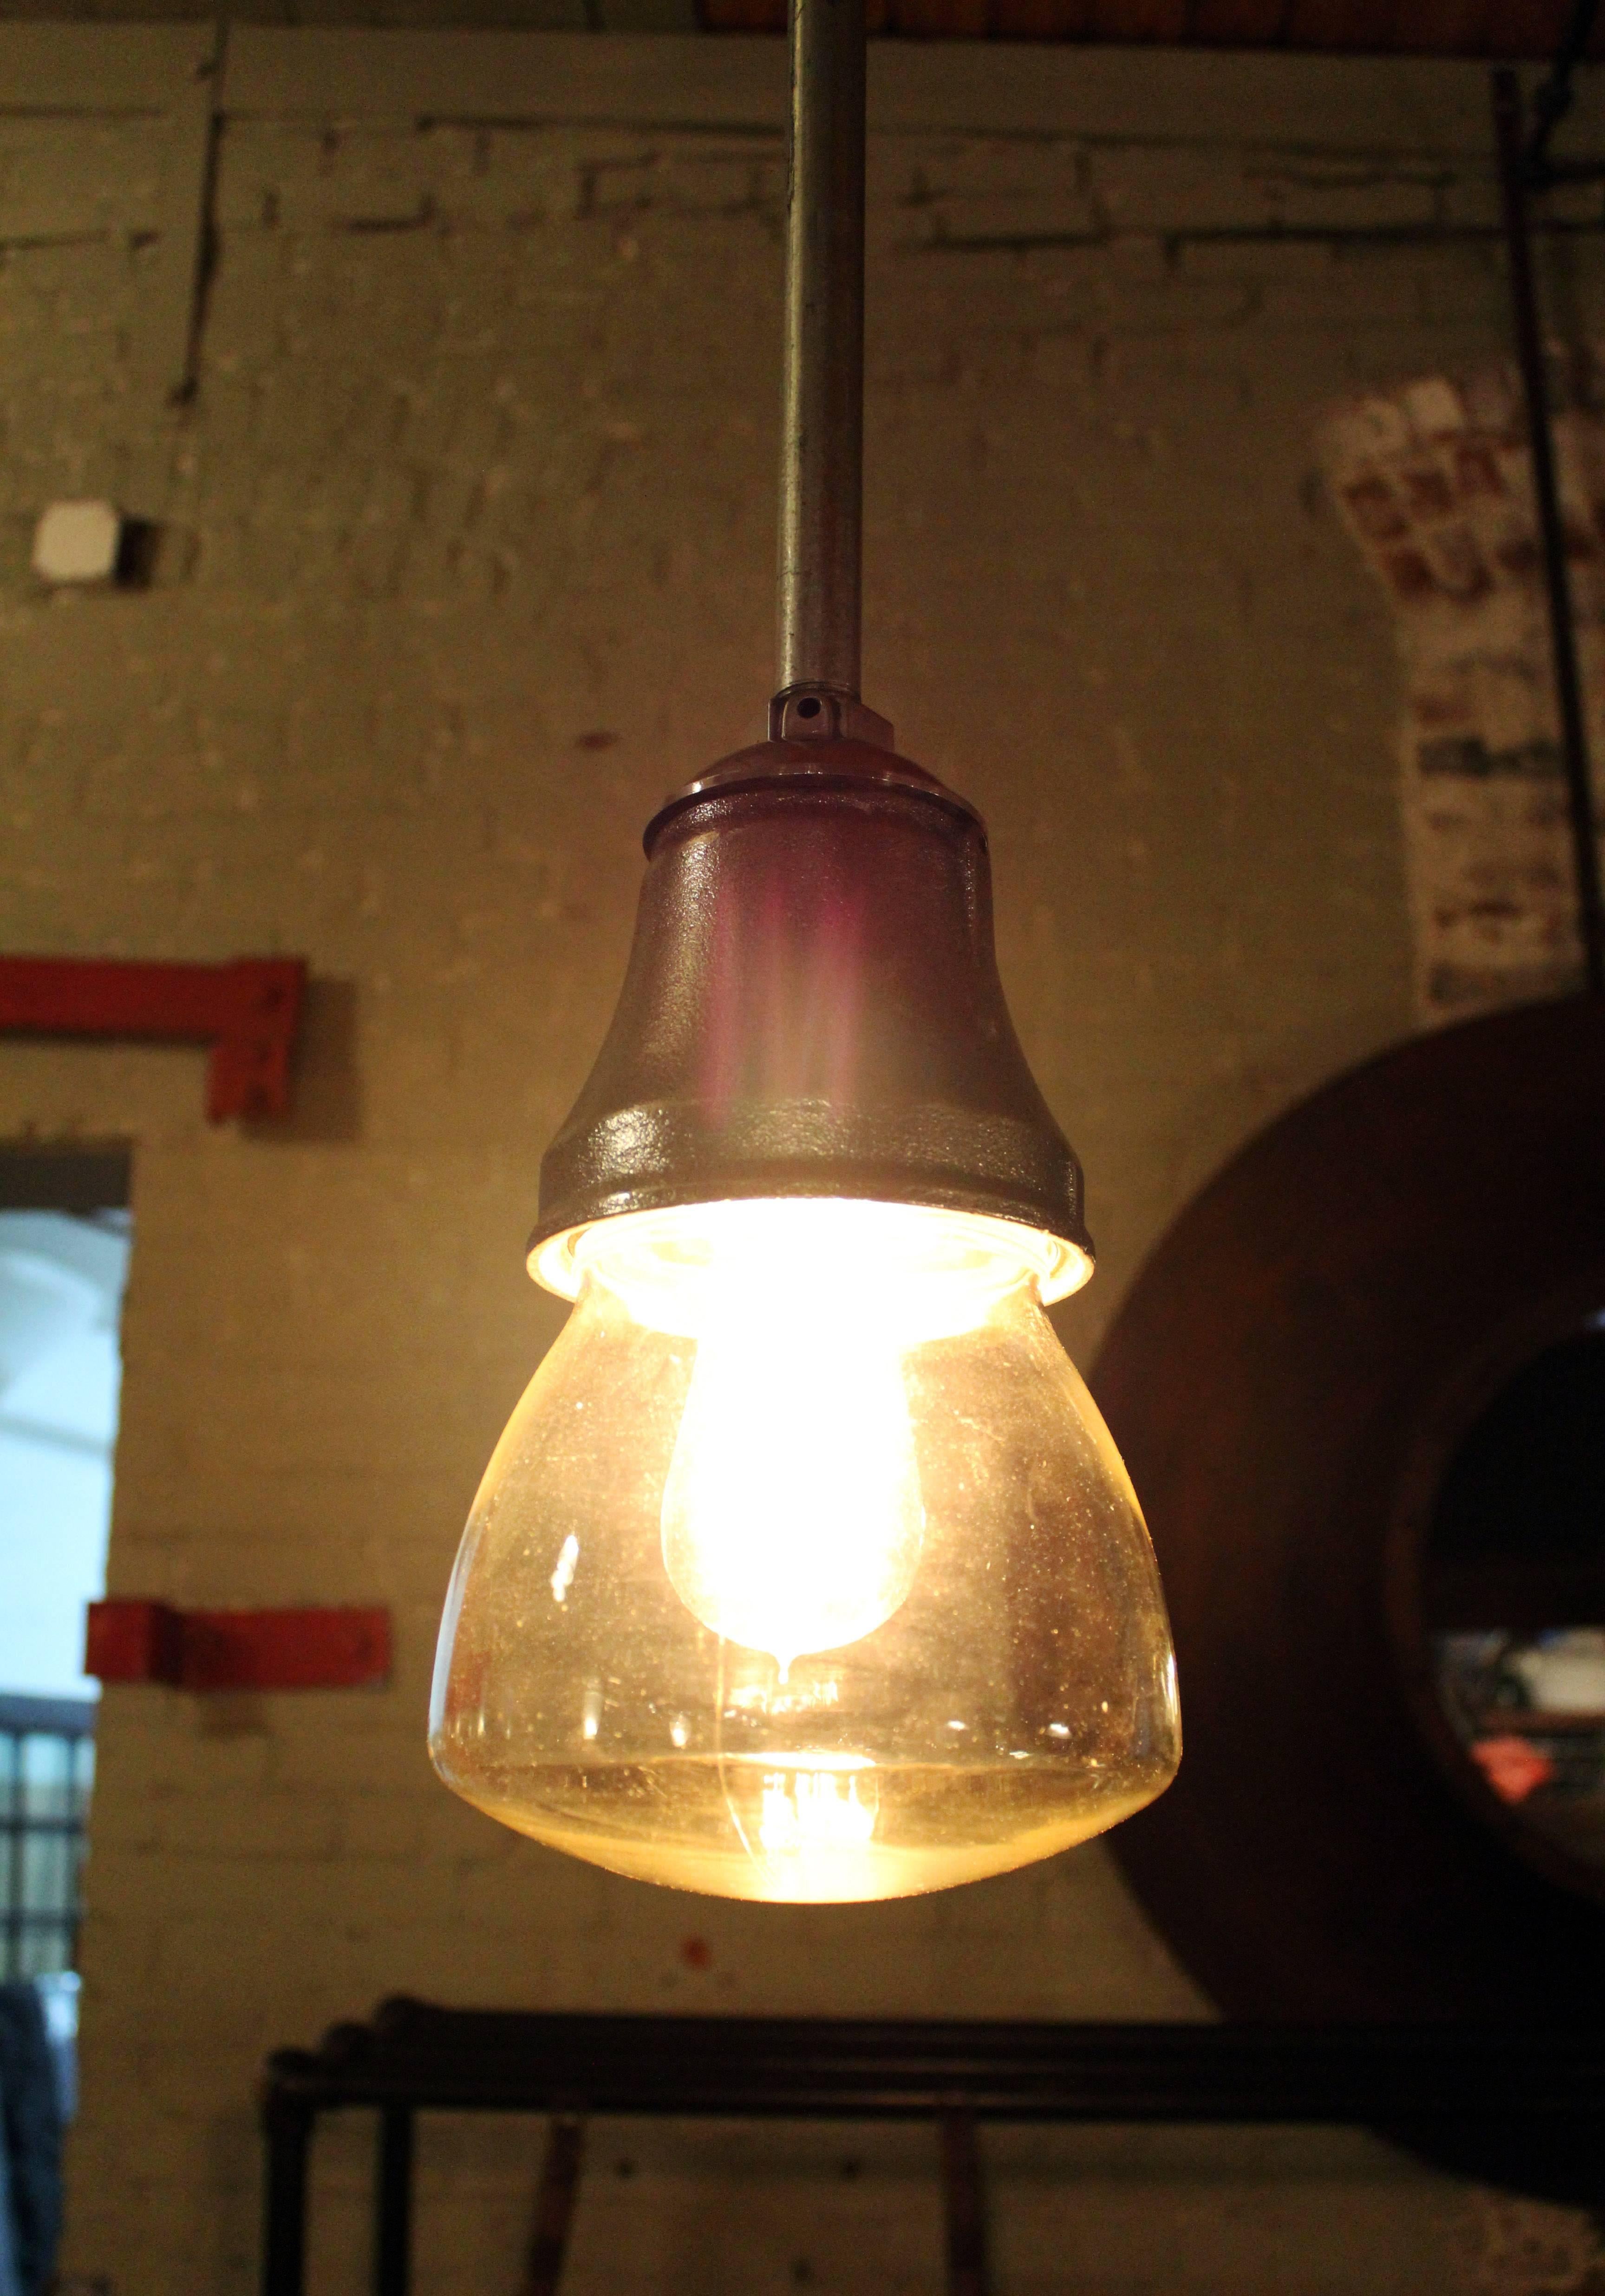 American Pendant Lamp Light Polished Aluminum Vintage Industrial Iron Glass Ceiling